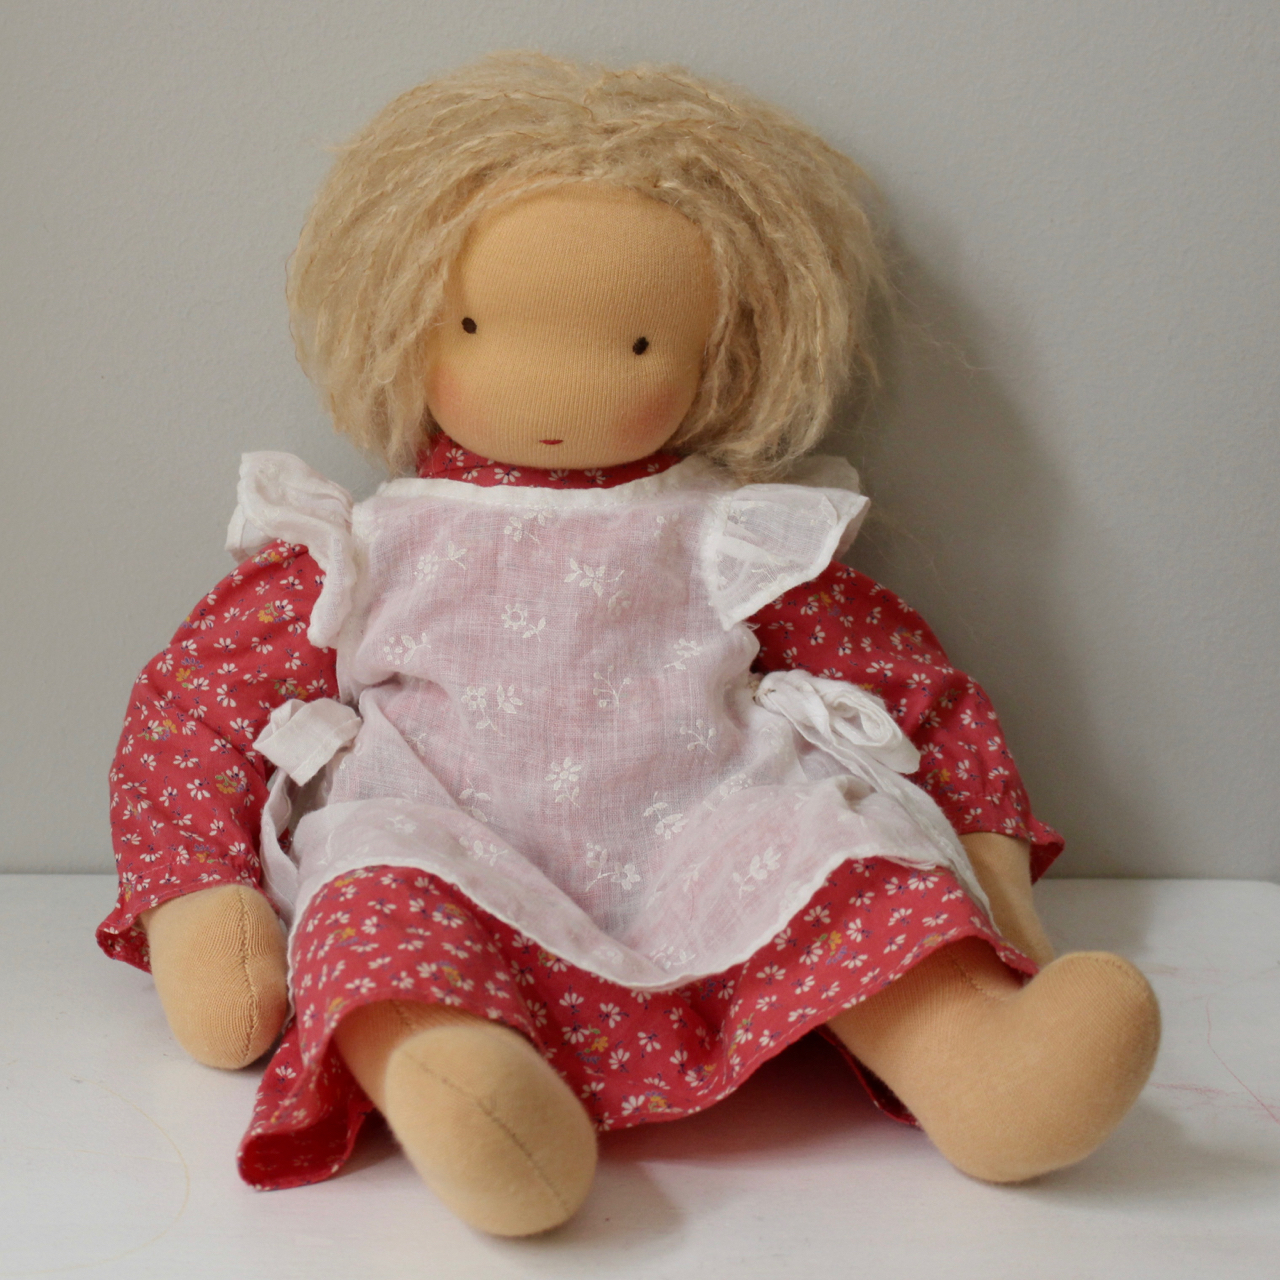 Waldorf doll girl in red dress and white apron, blond hair, made by feinslieb